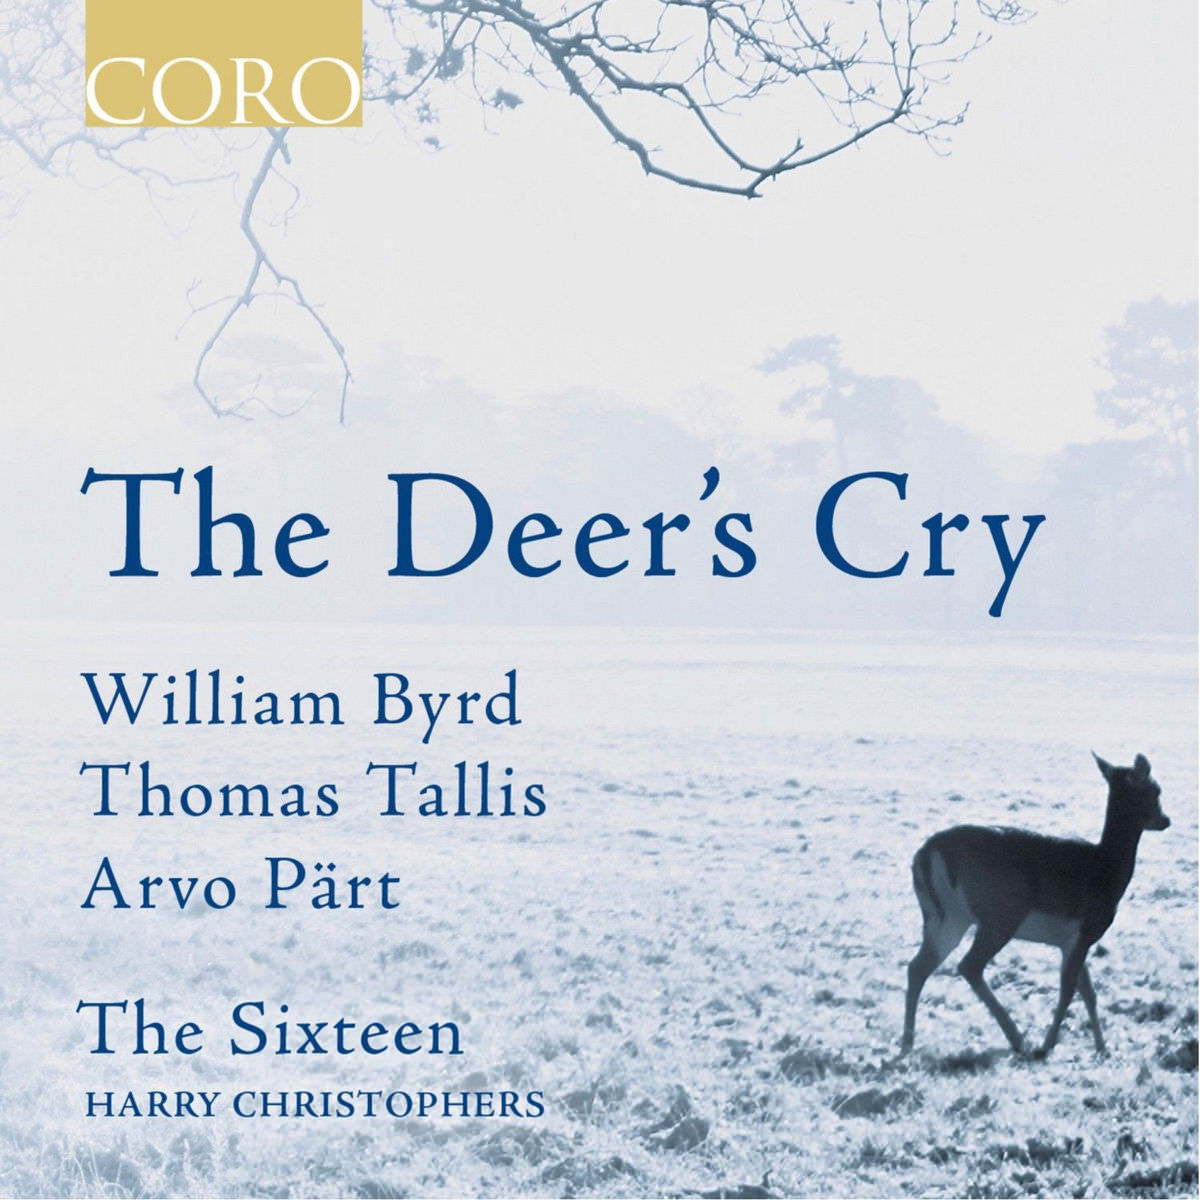 The Sixteen & Harry Christophers - The Deer’s Cry (2016) [Qobuz FLAC 24bit/96kHz]